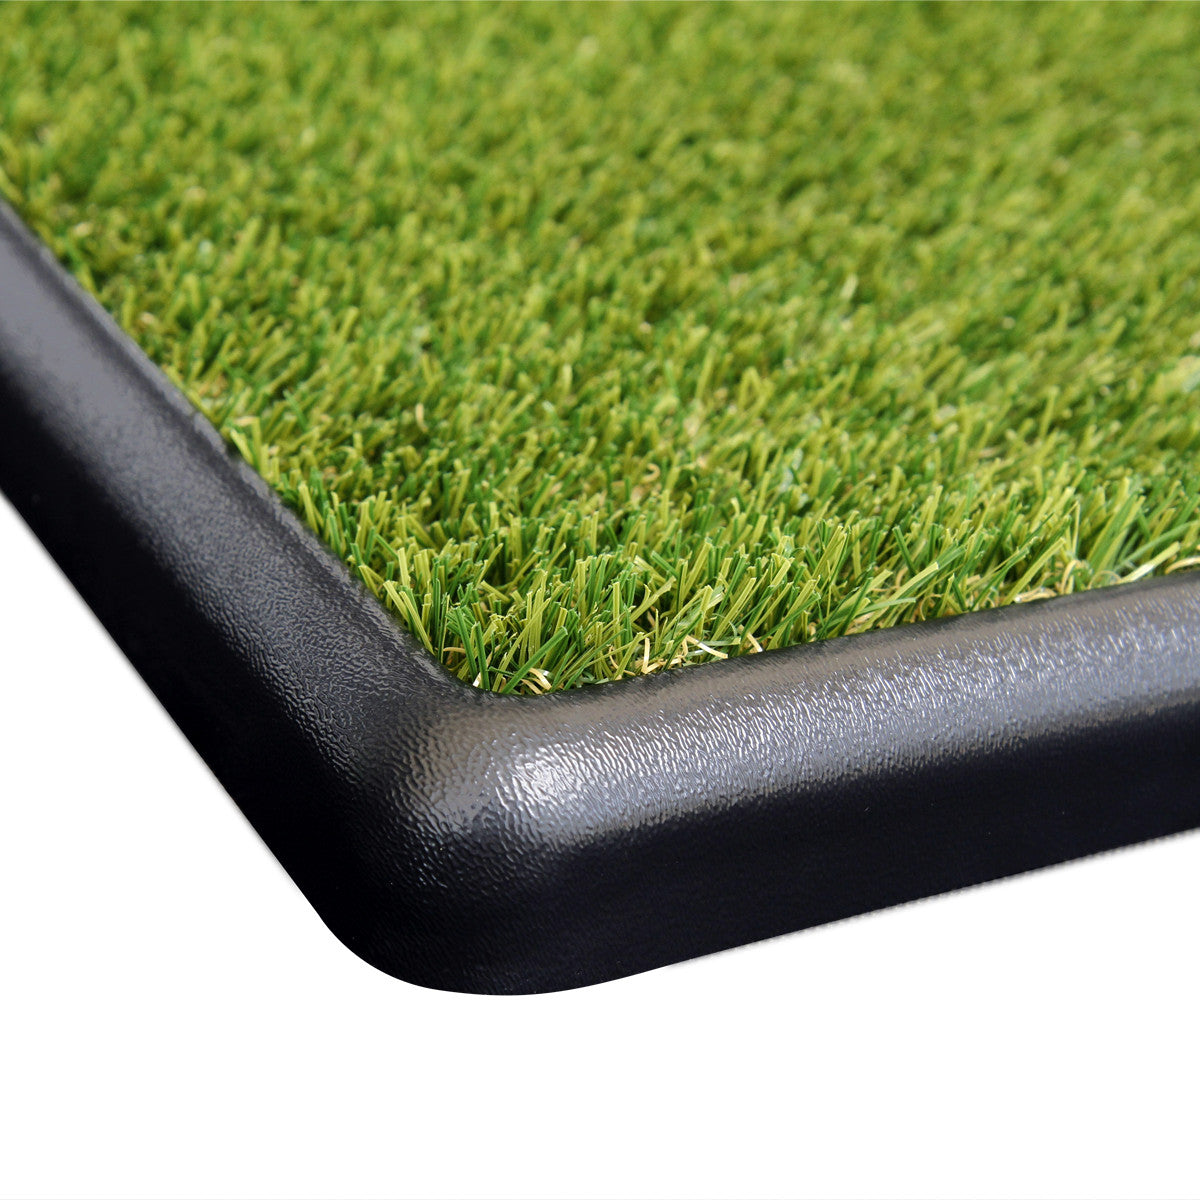 Low profile tray and flush fit grass for pets